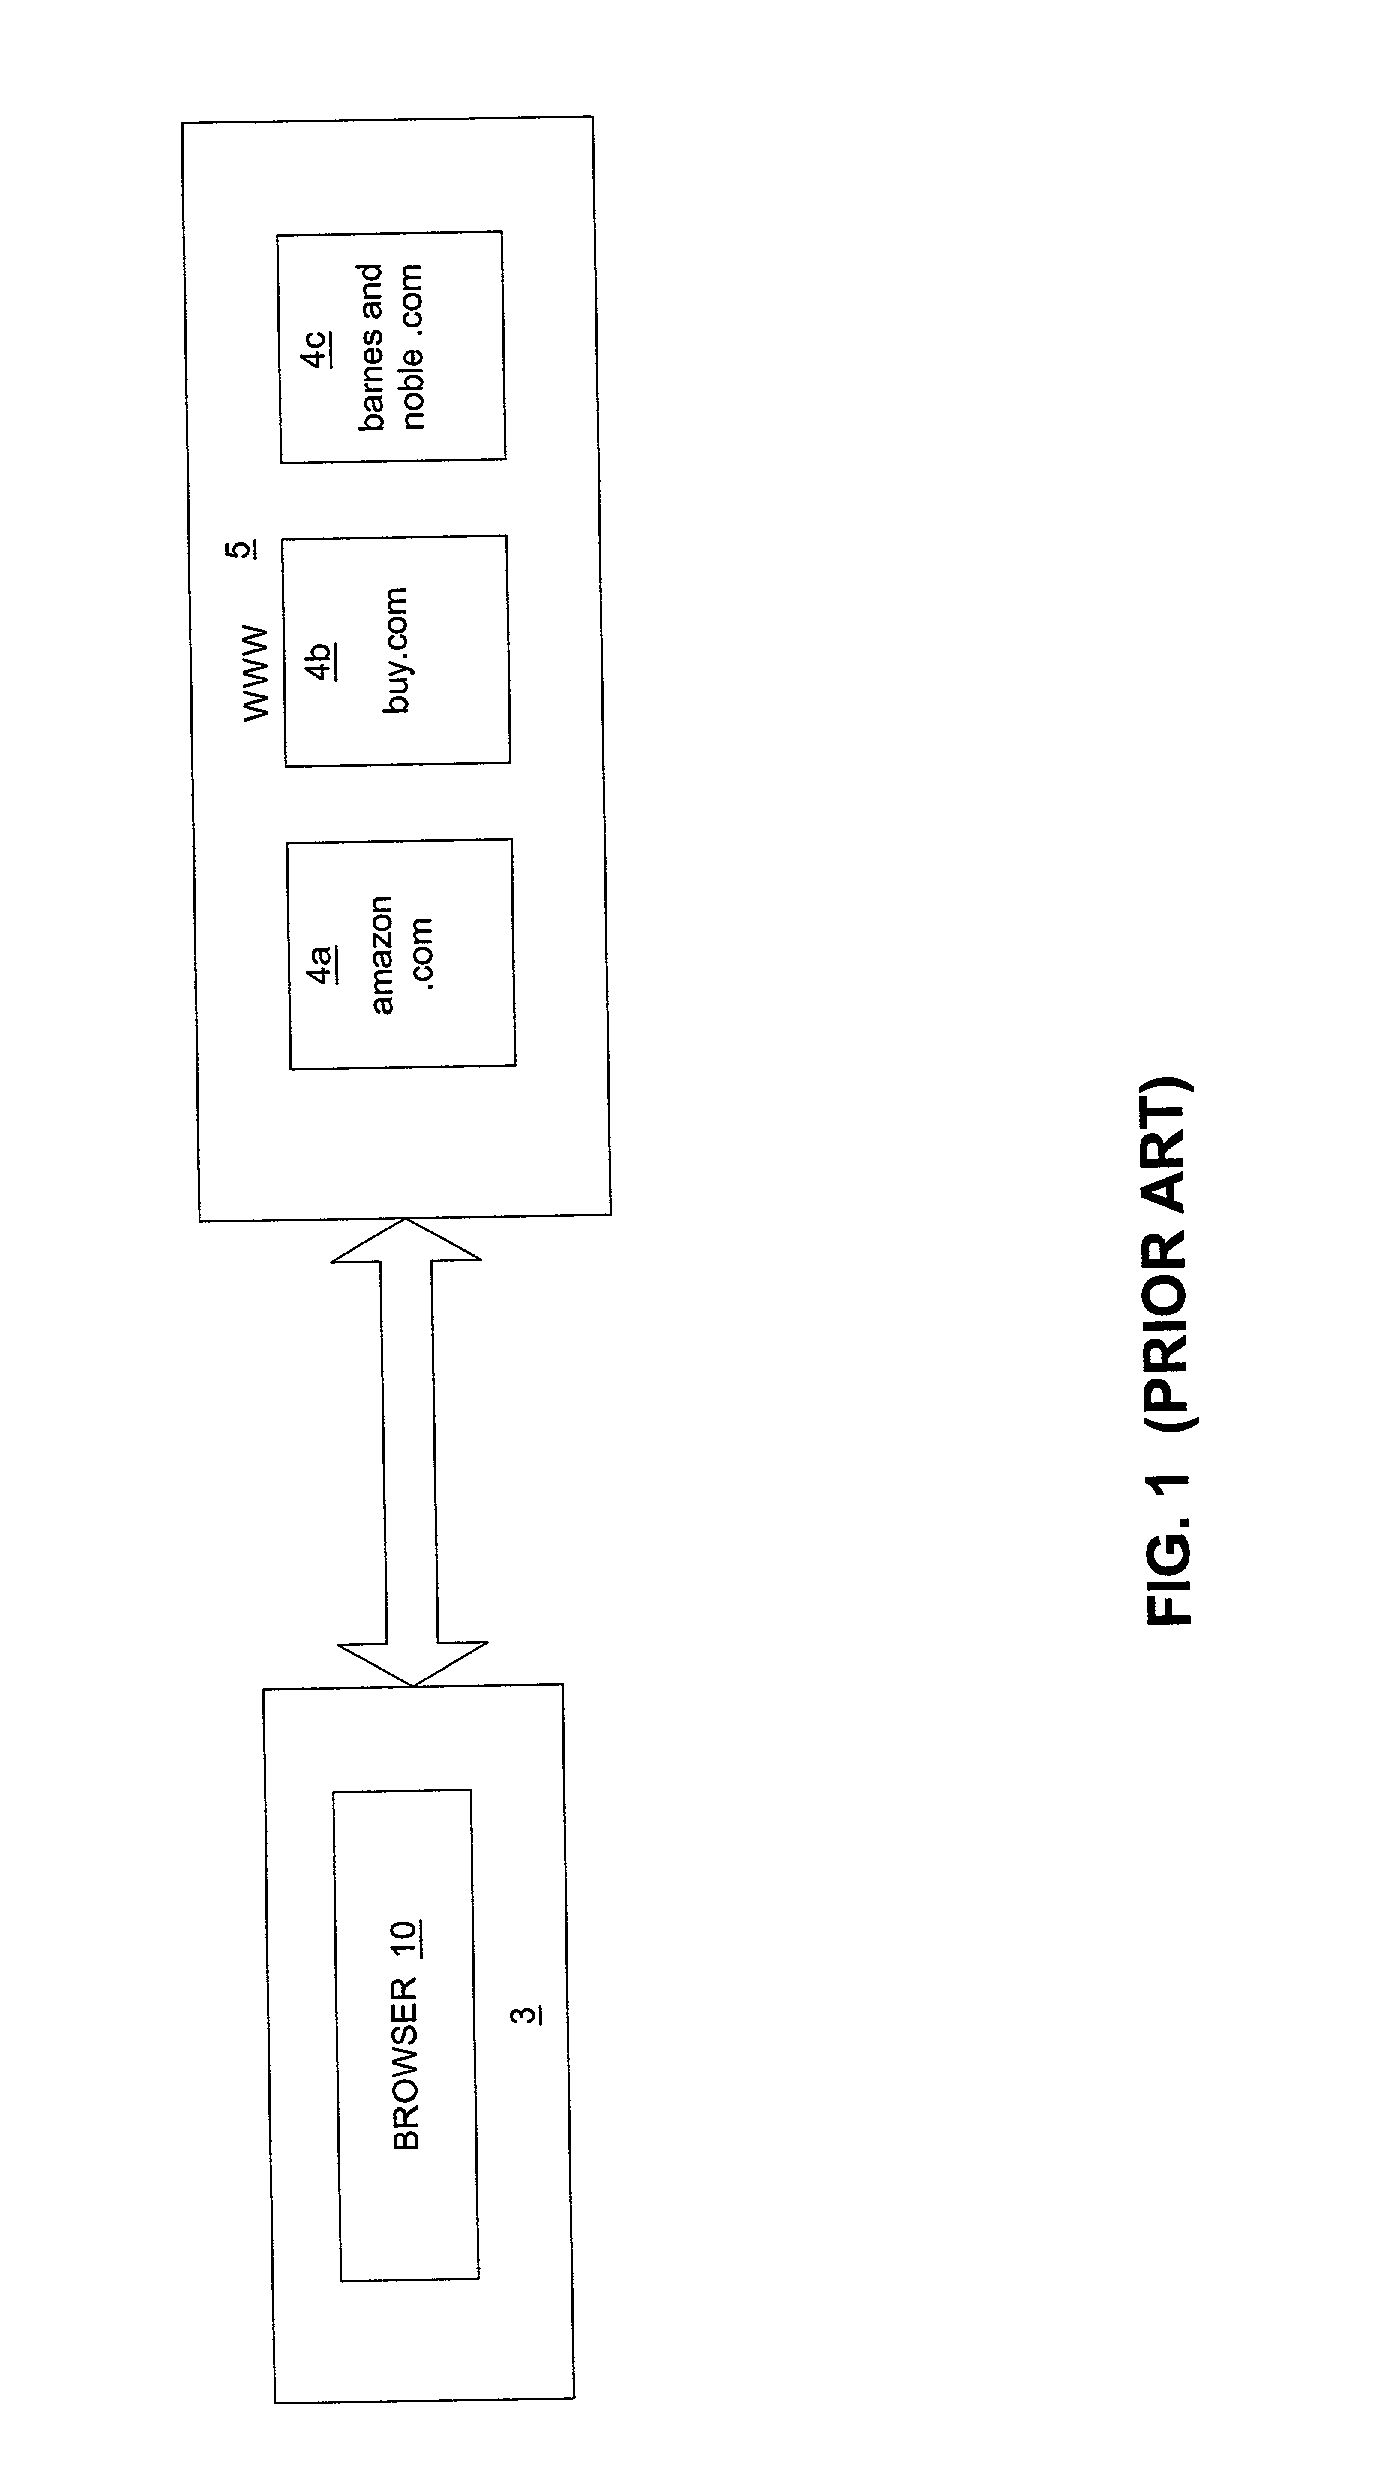 Systems and methods for context personalized web browsing based on a browser companion agent and associated services